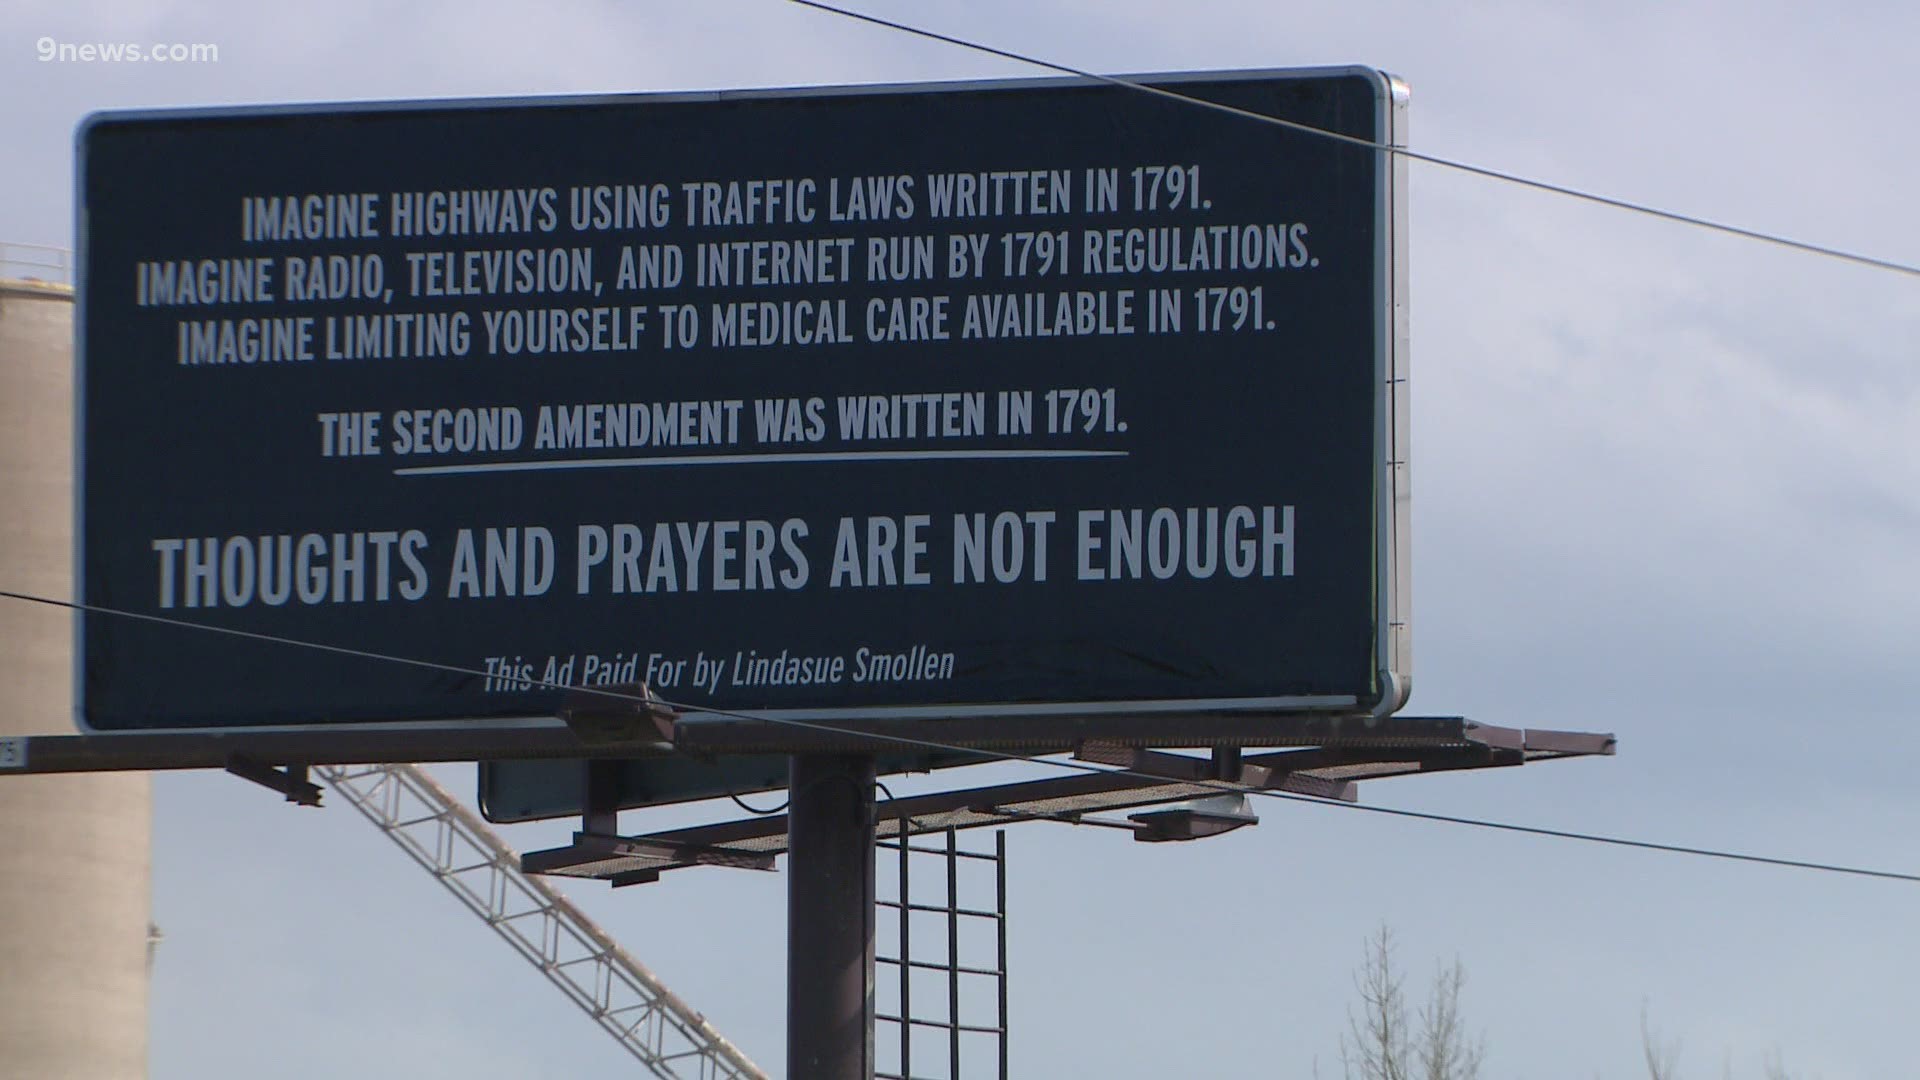 One billboard is south of Boulder off State Highway 93. The second one is off I-25 north of Denver.